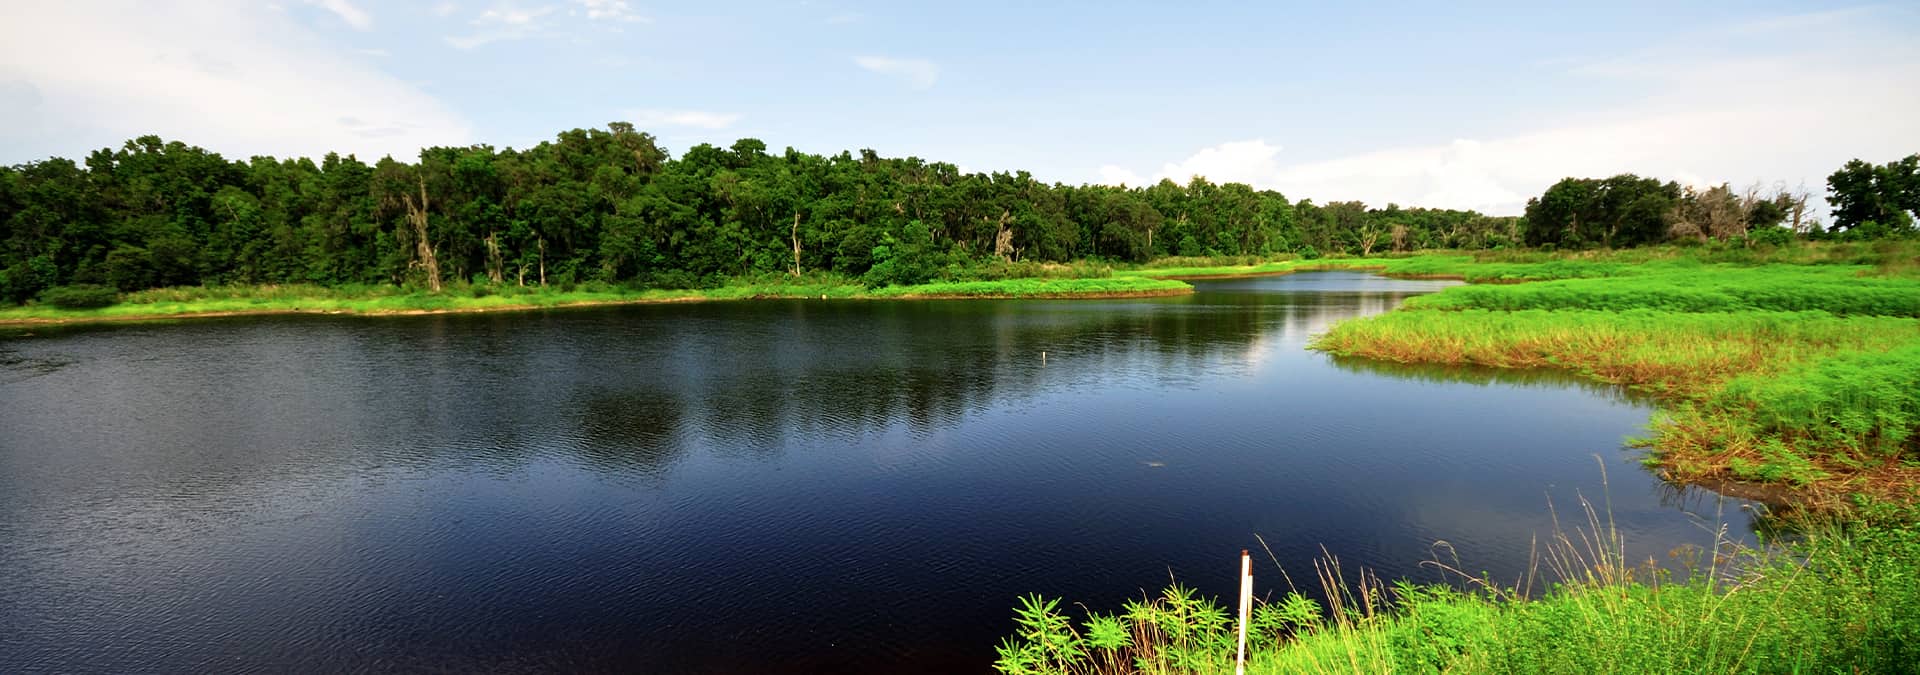 a view of the water and vegetation of asbury lake in florida